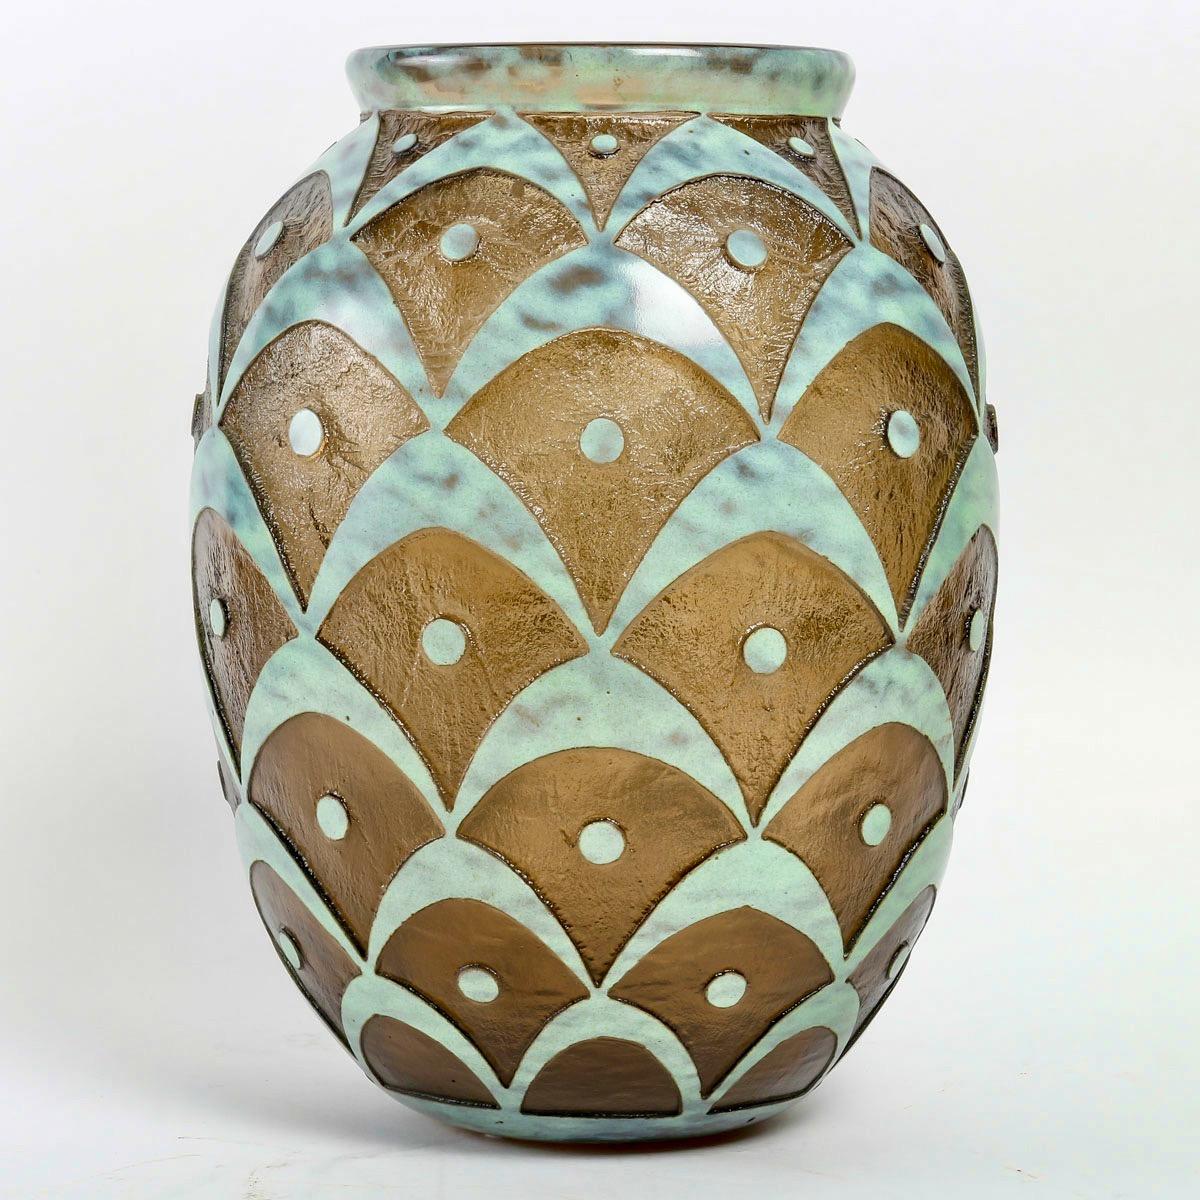 A Daum Art Deco smoky glass 'Peacock Feather' vase, 
circa 1925, 
Engraved Daum Nançy, France with cross of Lorraine
With mottled and polished flashing, deeply acid-etched.

Daum is a crystal studio based in Nancy, France, founded in 1878 by Jean